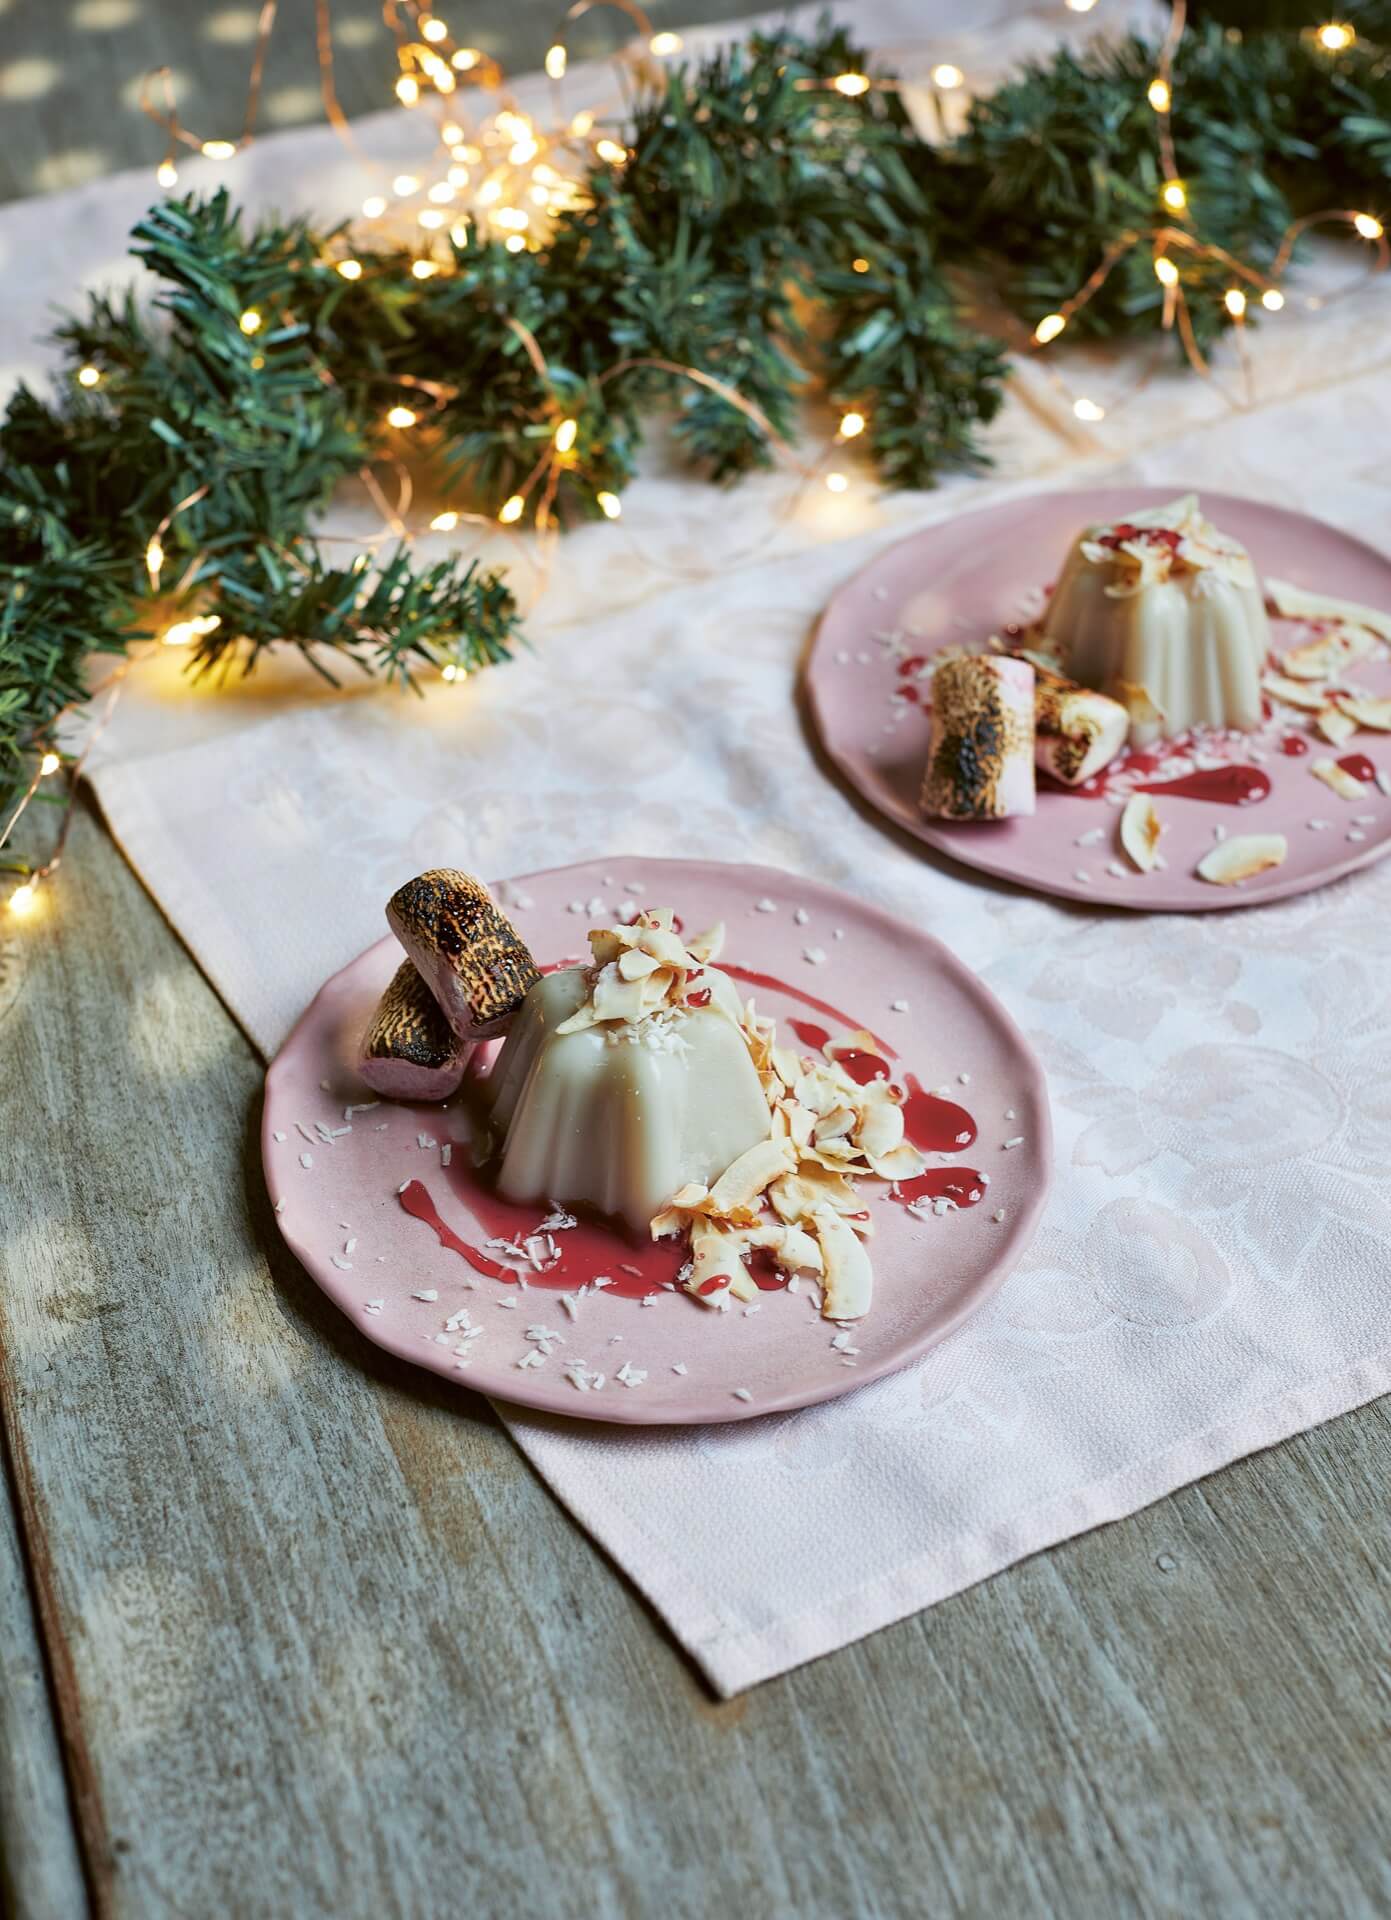 Toasted coconut and marshmallow panna cotta recipe from Easy Vegan Christmas by Katy Beskow